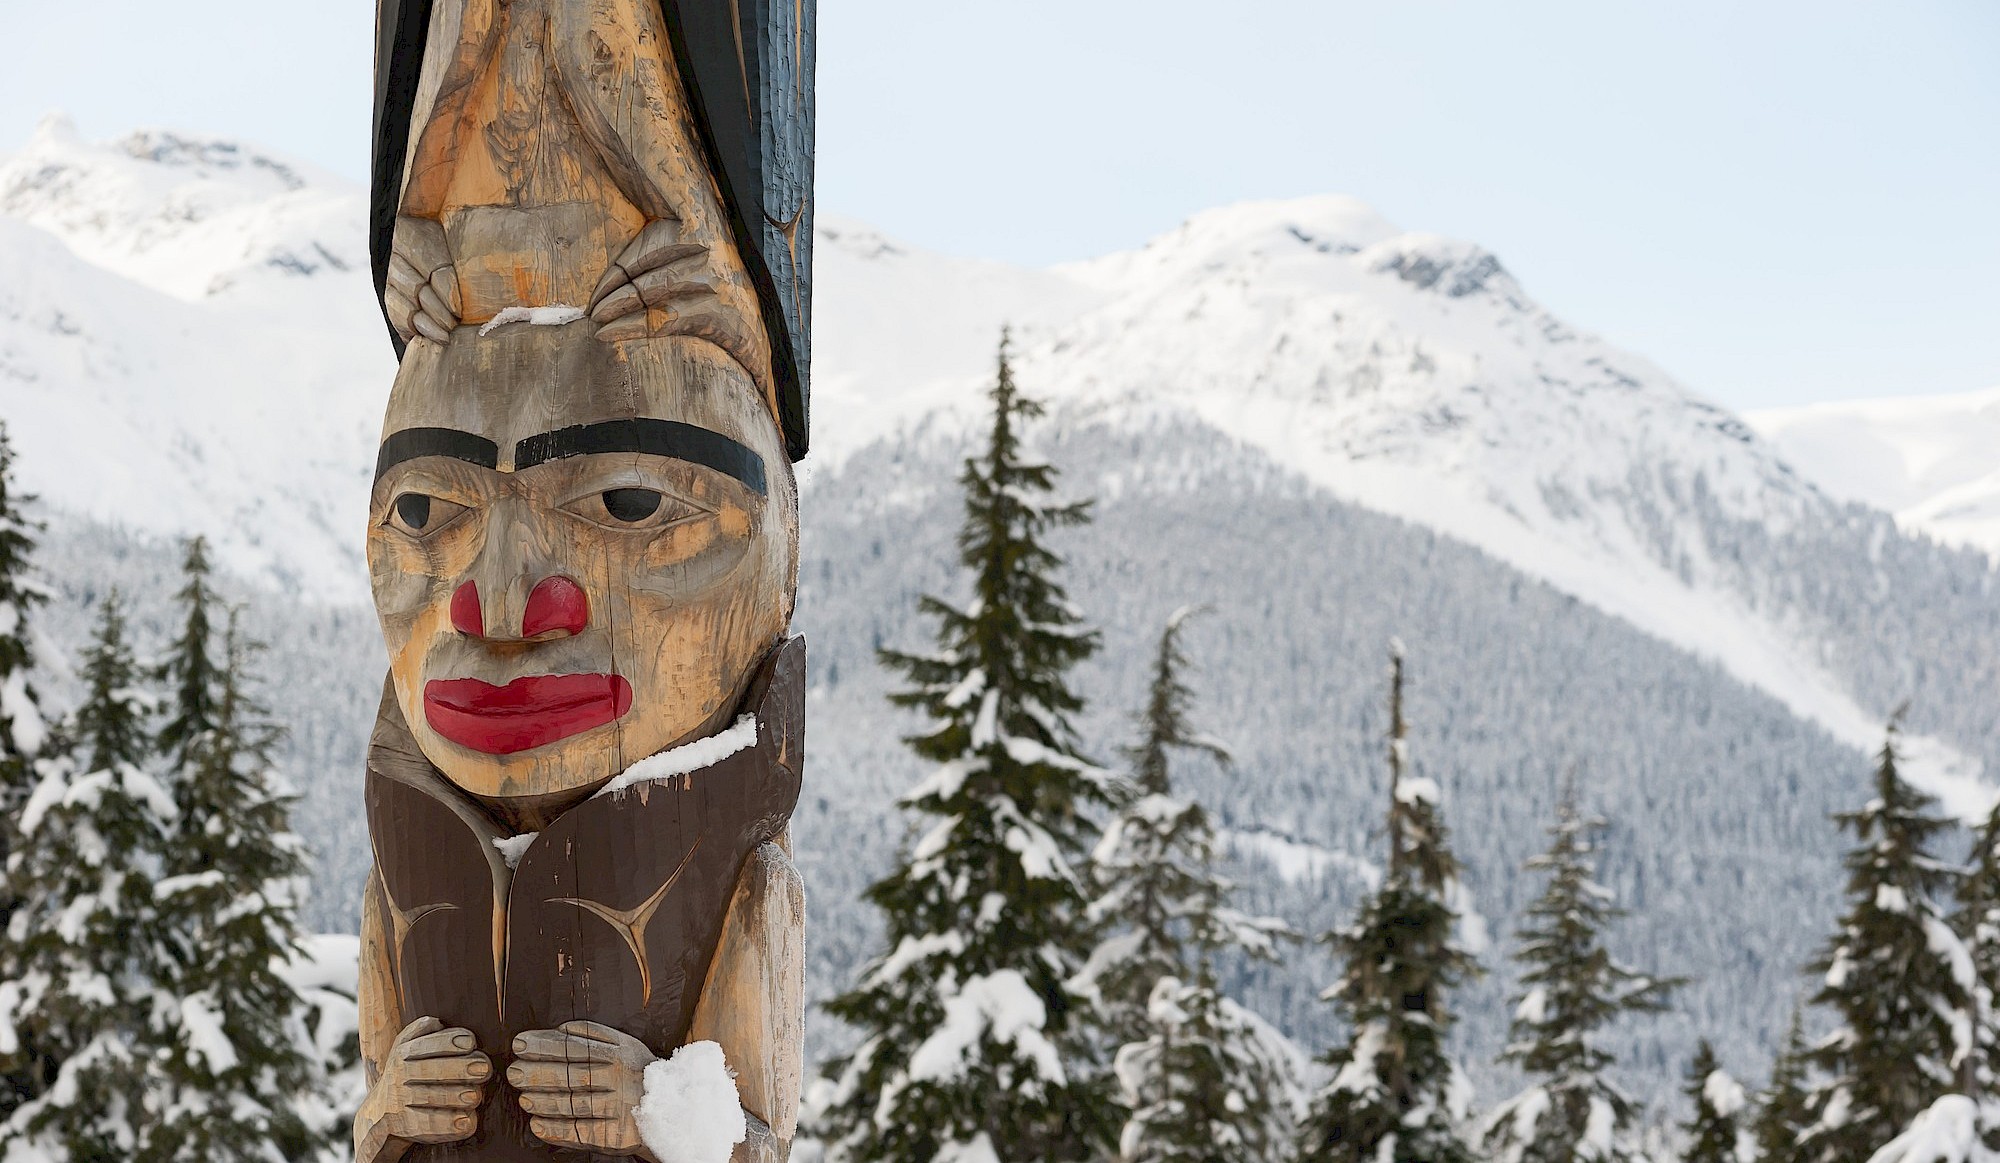 Totem pole with snowcapped mountains behind